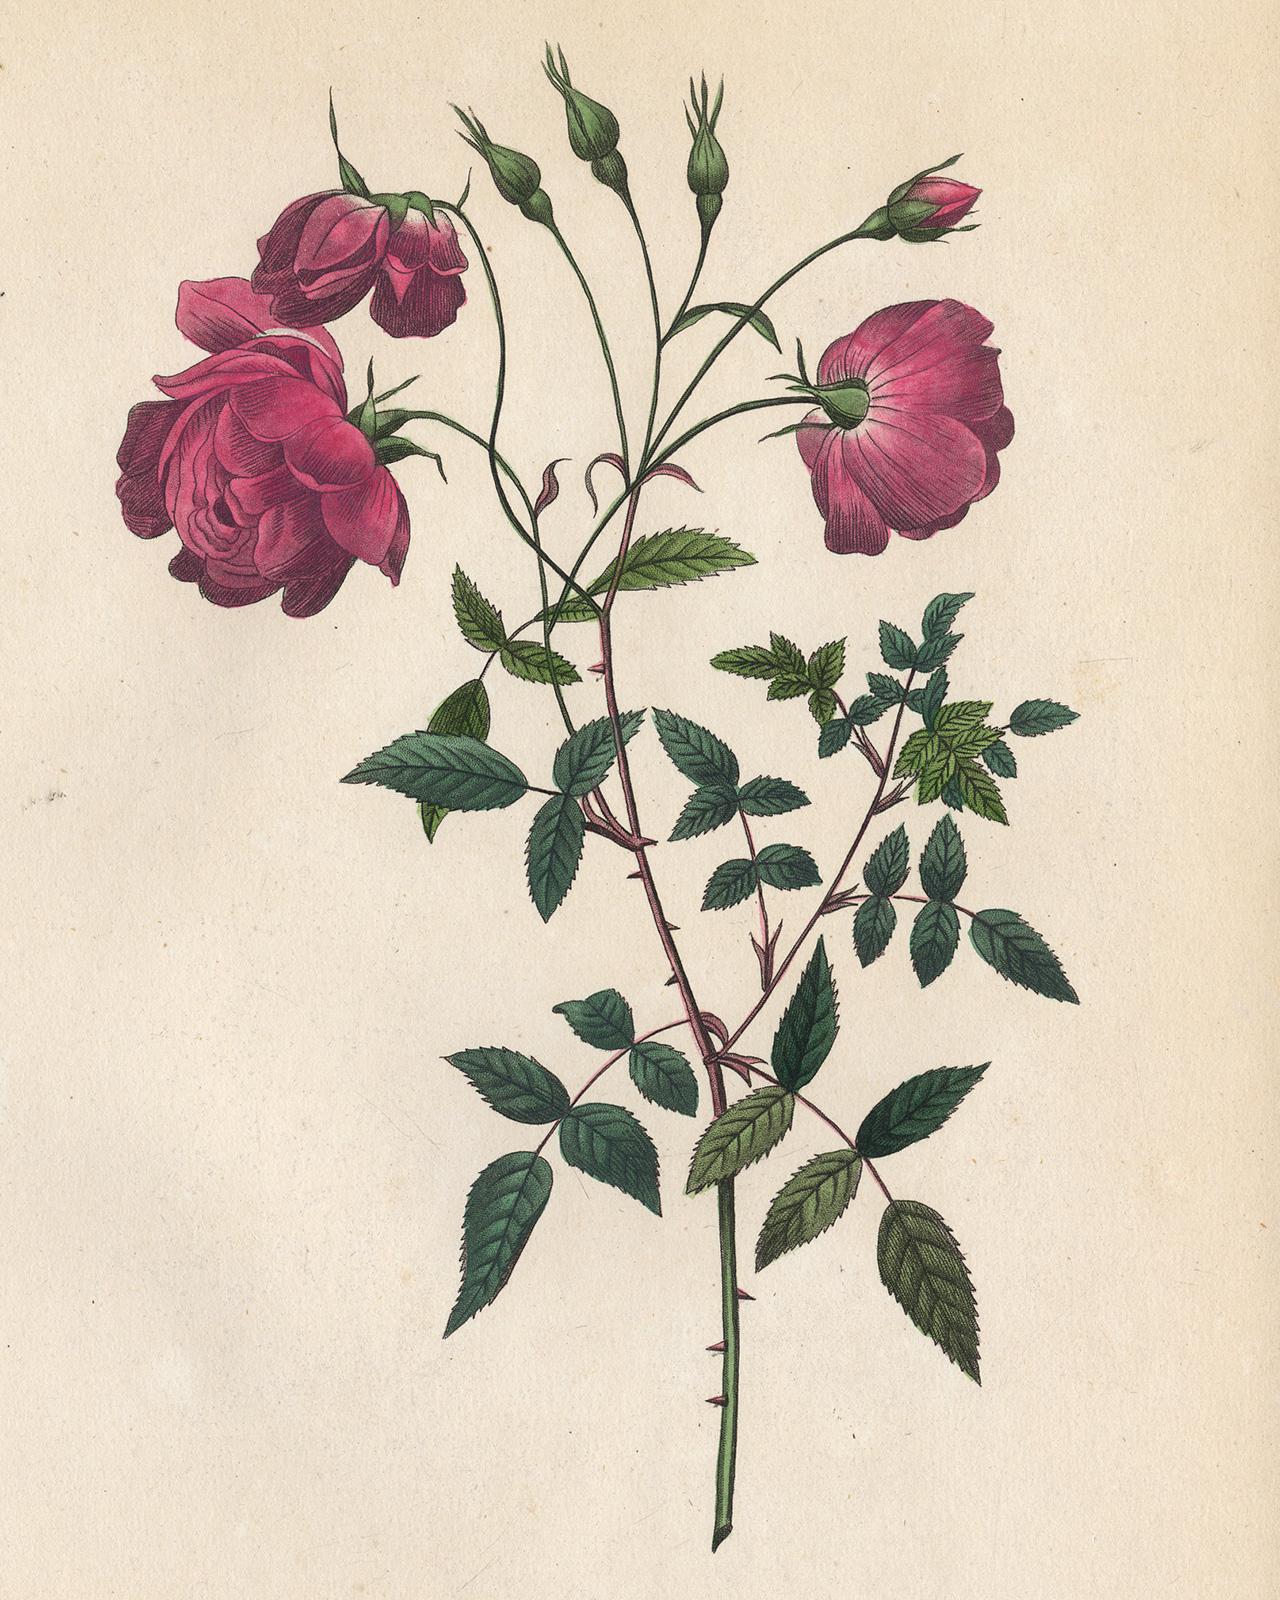 China Rose by Redoute - Les Roses - Handcoloured engraving - 19th century - Print by Pierre-Joseph Redouté